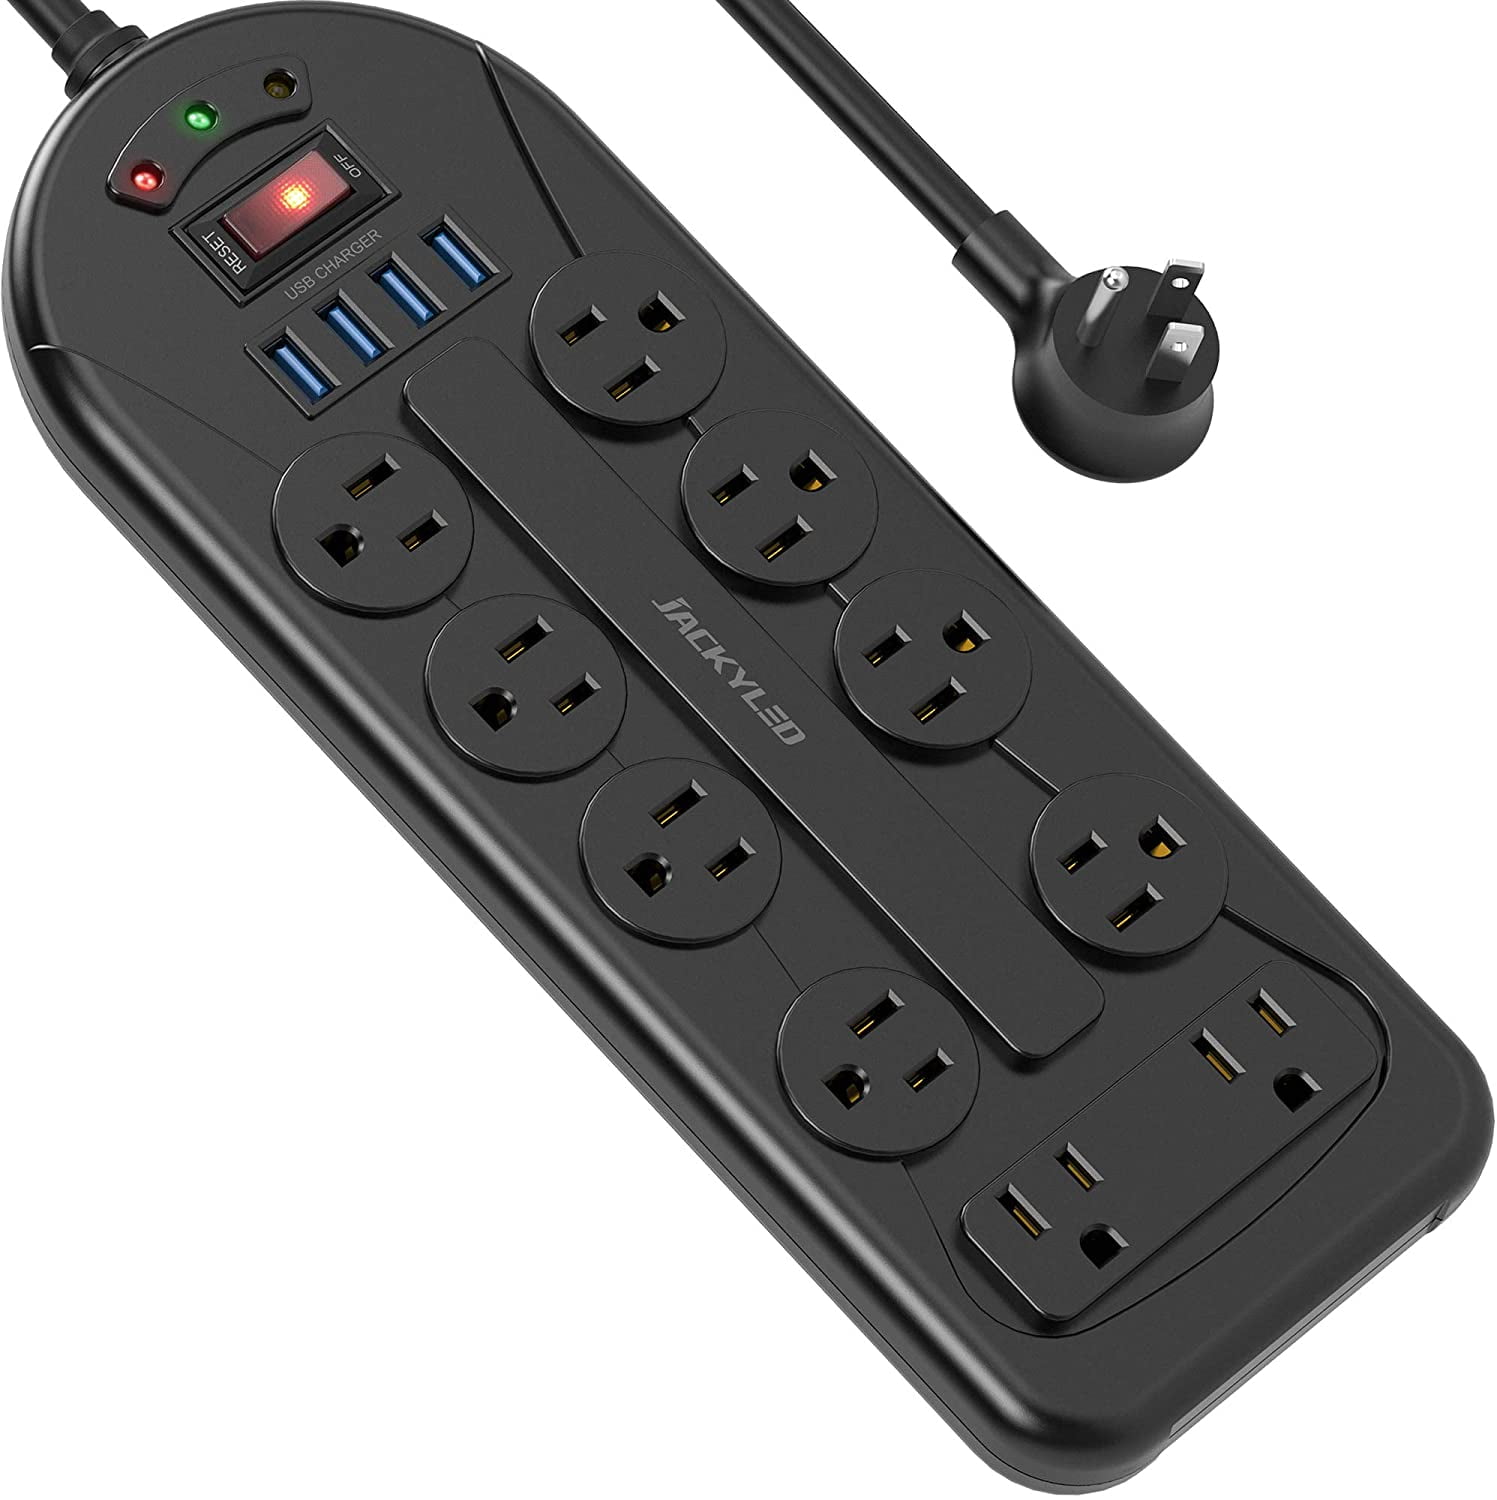 ACKYLED 16 AC Outlets with 6 USB Ports 1050J Power Strip Tower Surge  Protector